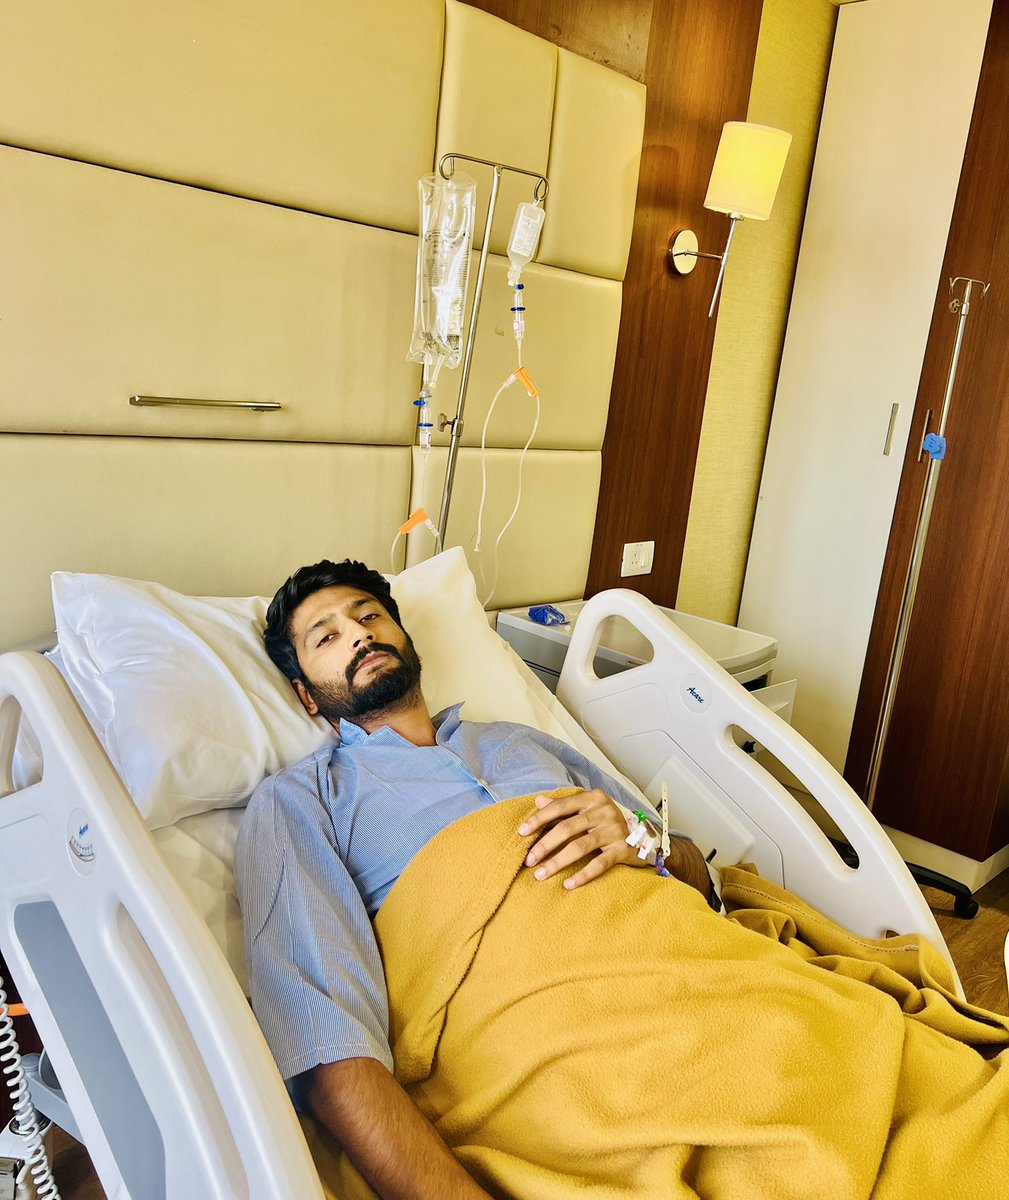 Dear all, it’s very hard to stay away from cricket, It's unfortunate, but due to my medical condition, I would be missing most of the matches of the upcoming Ranji season. I am on the road to recovery and will be back in the side once deemed fit.

I am grateful for all the wishes